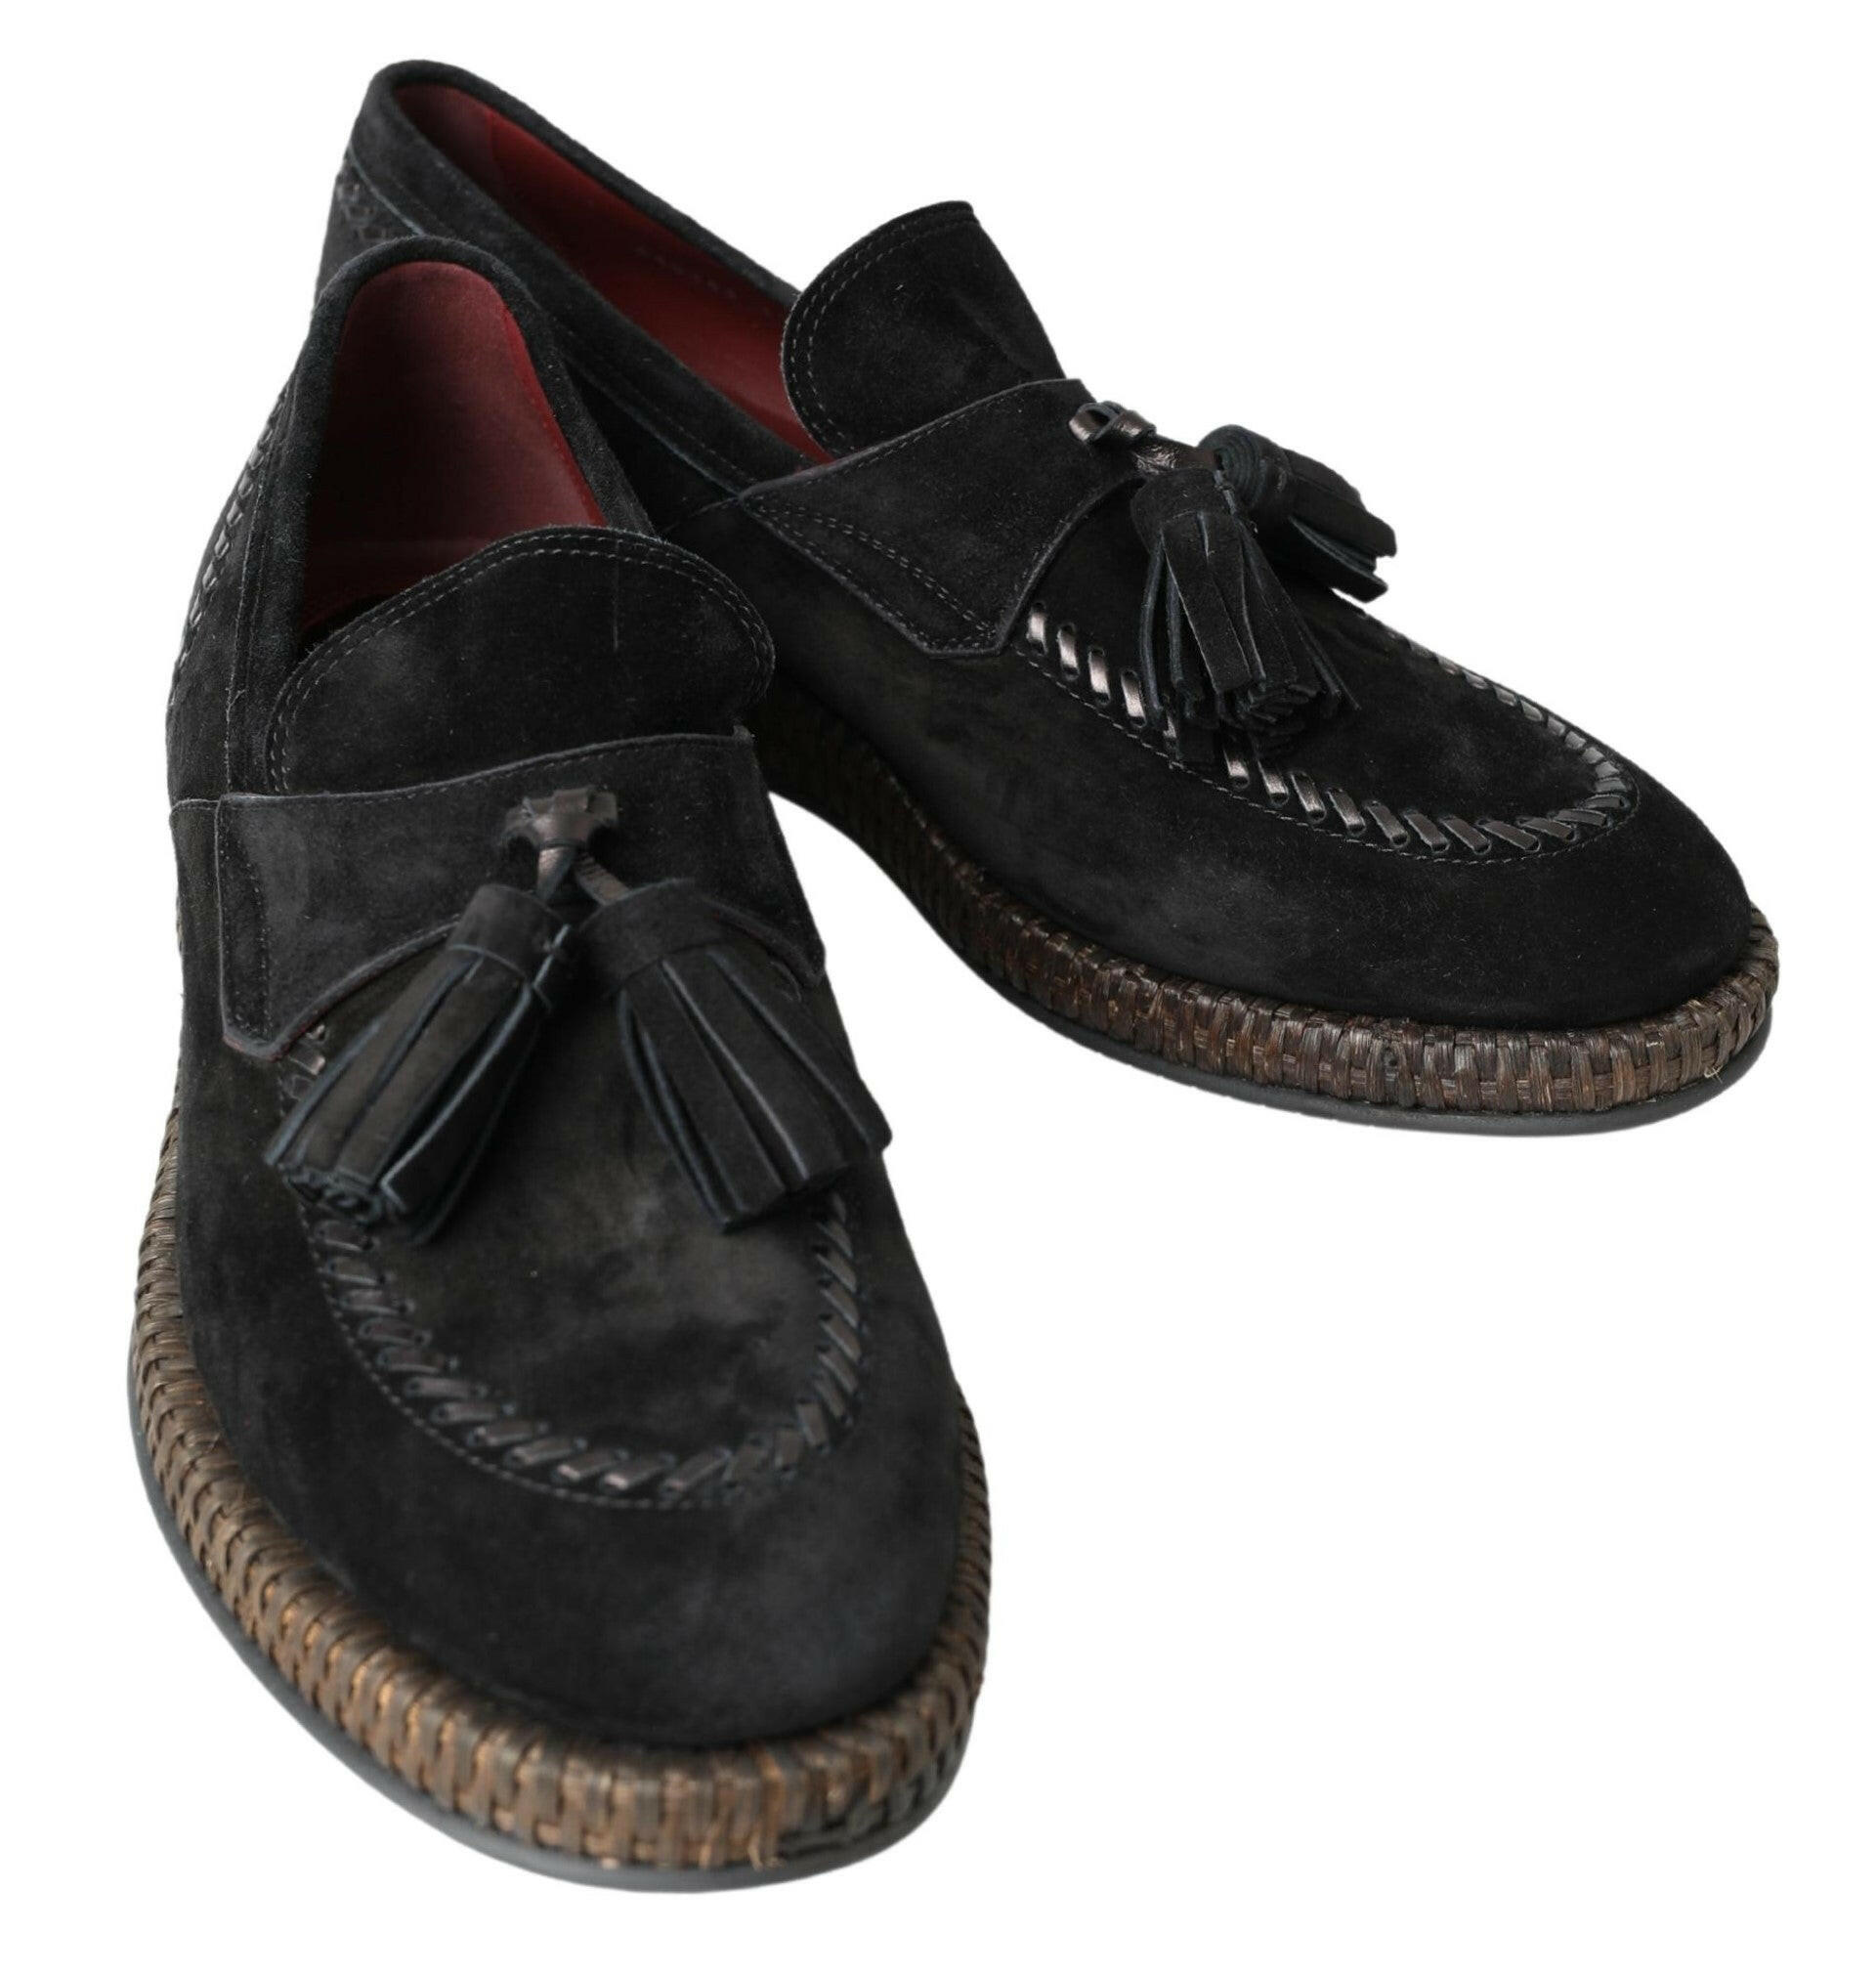 Dolce & Gabbana Black Suede Leather Casual Espadrille Shoes - GENUINE AUTHENTIC BRAND LLC  